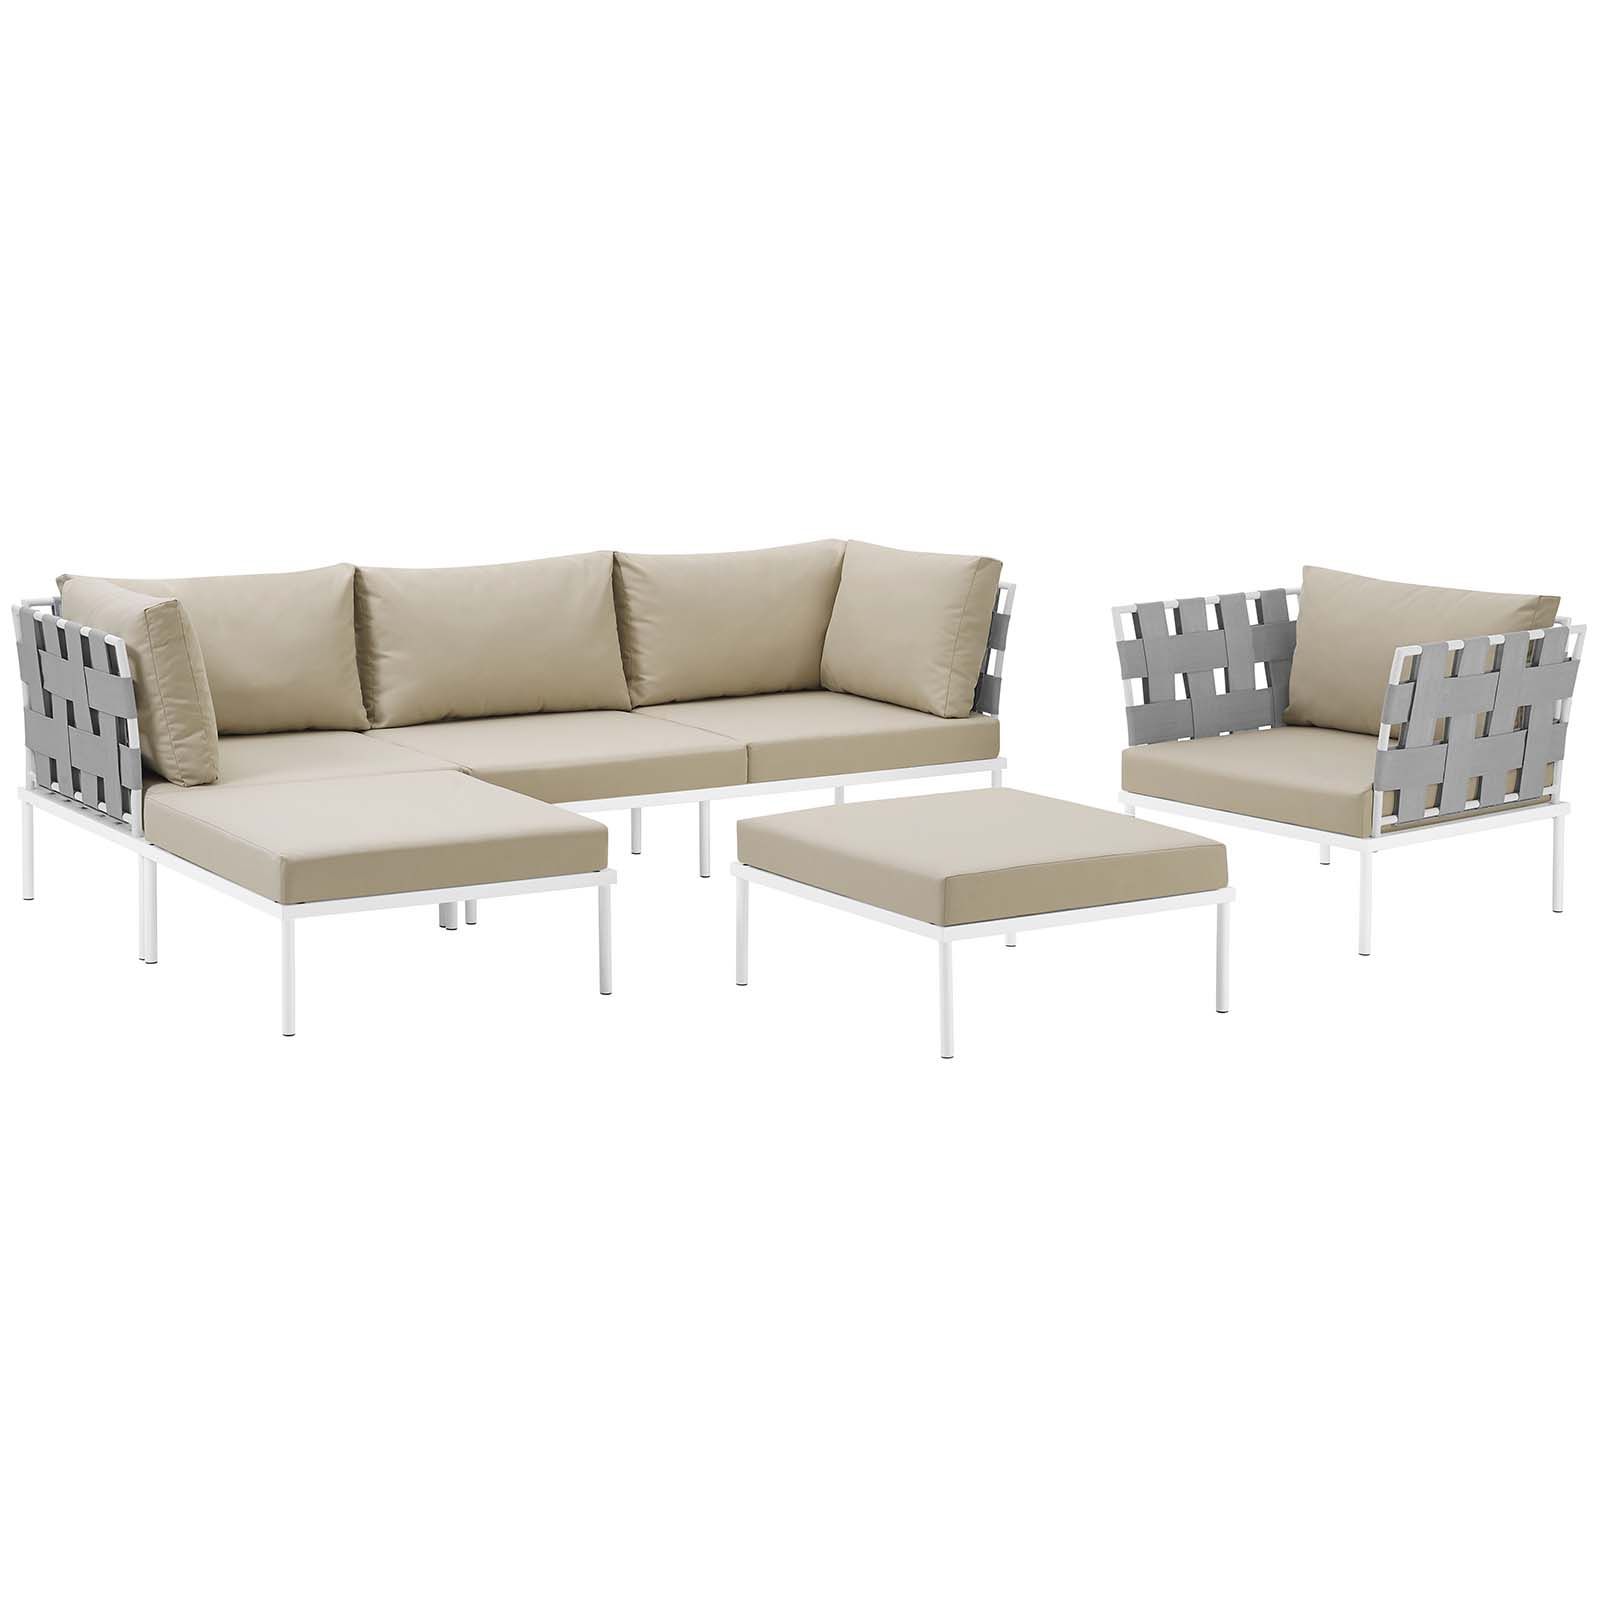 Popular Harmony 6 Piece Outdoor Patio Aluminum Sectional Sofa Set With Regard To 6 Piece Outdoor Sectional Sofa Patio Sets (View 4 of 15)